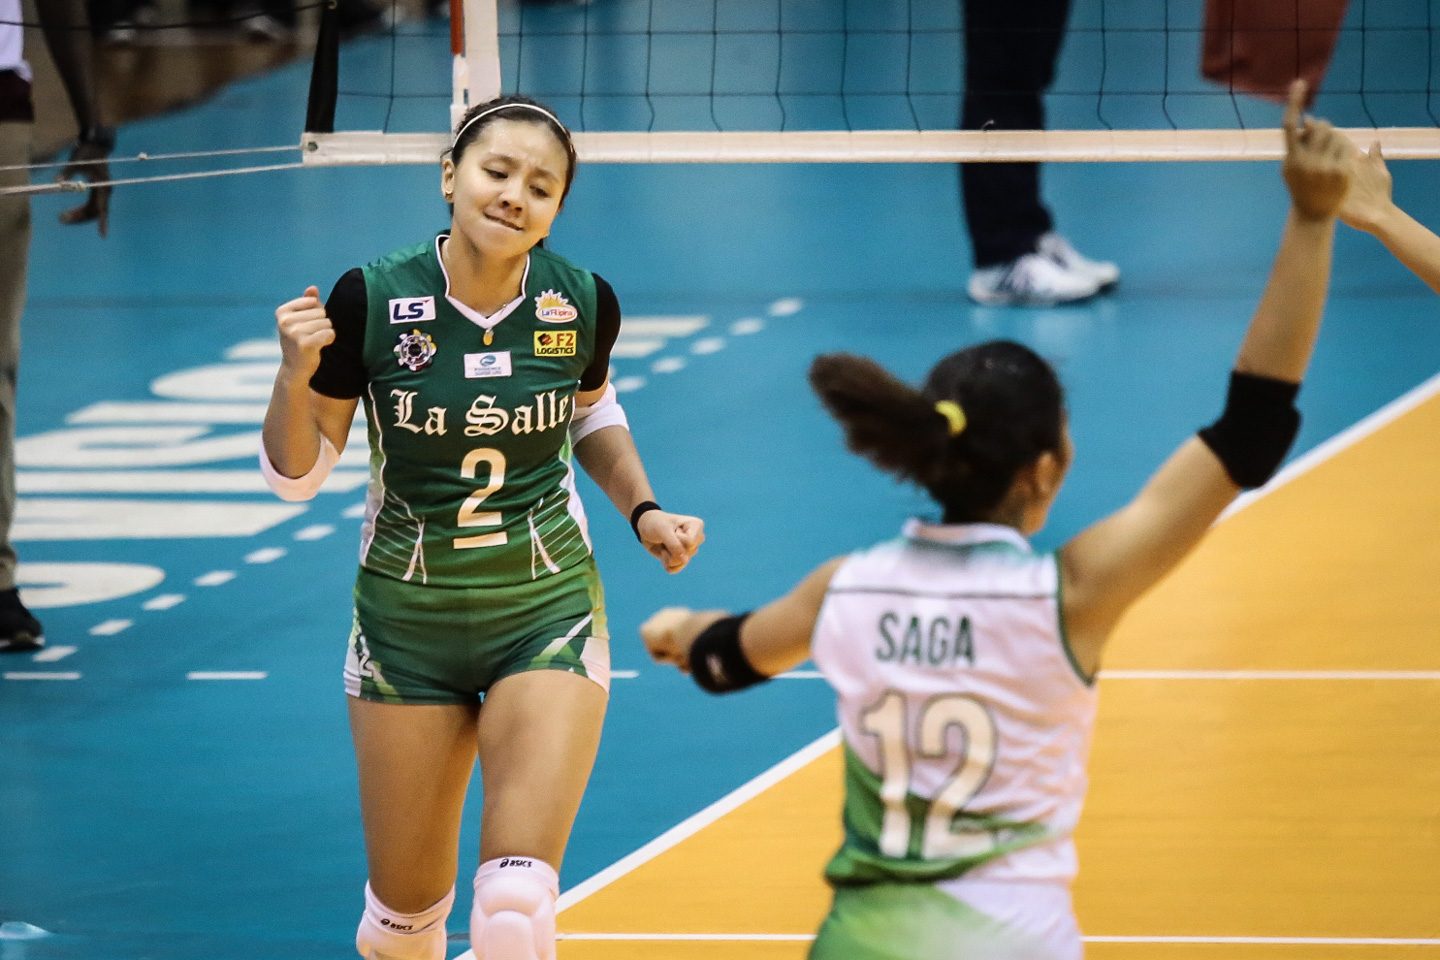 Rivals no more: Cheng, Ogunsanya ready to play with former foes in Choco Mucho